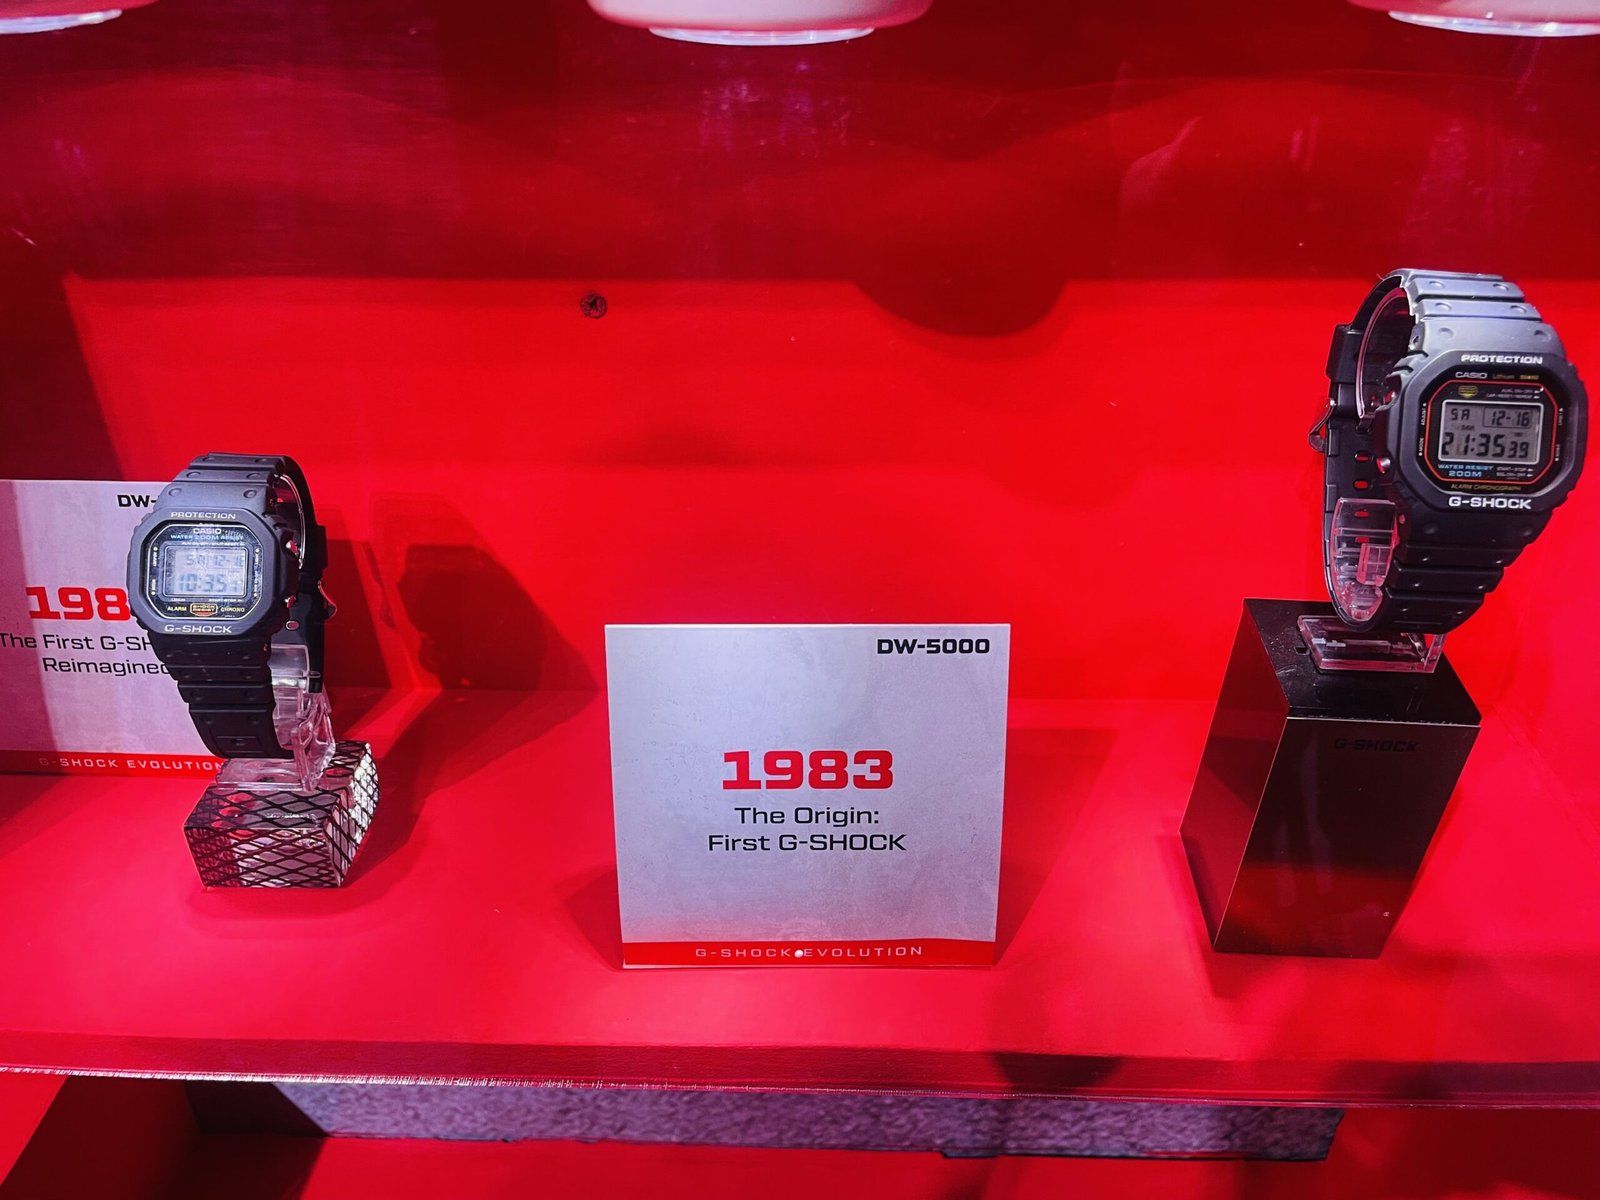 The First G-Shock